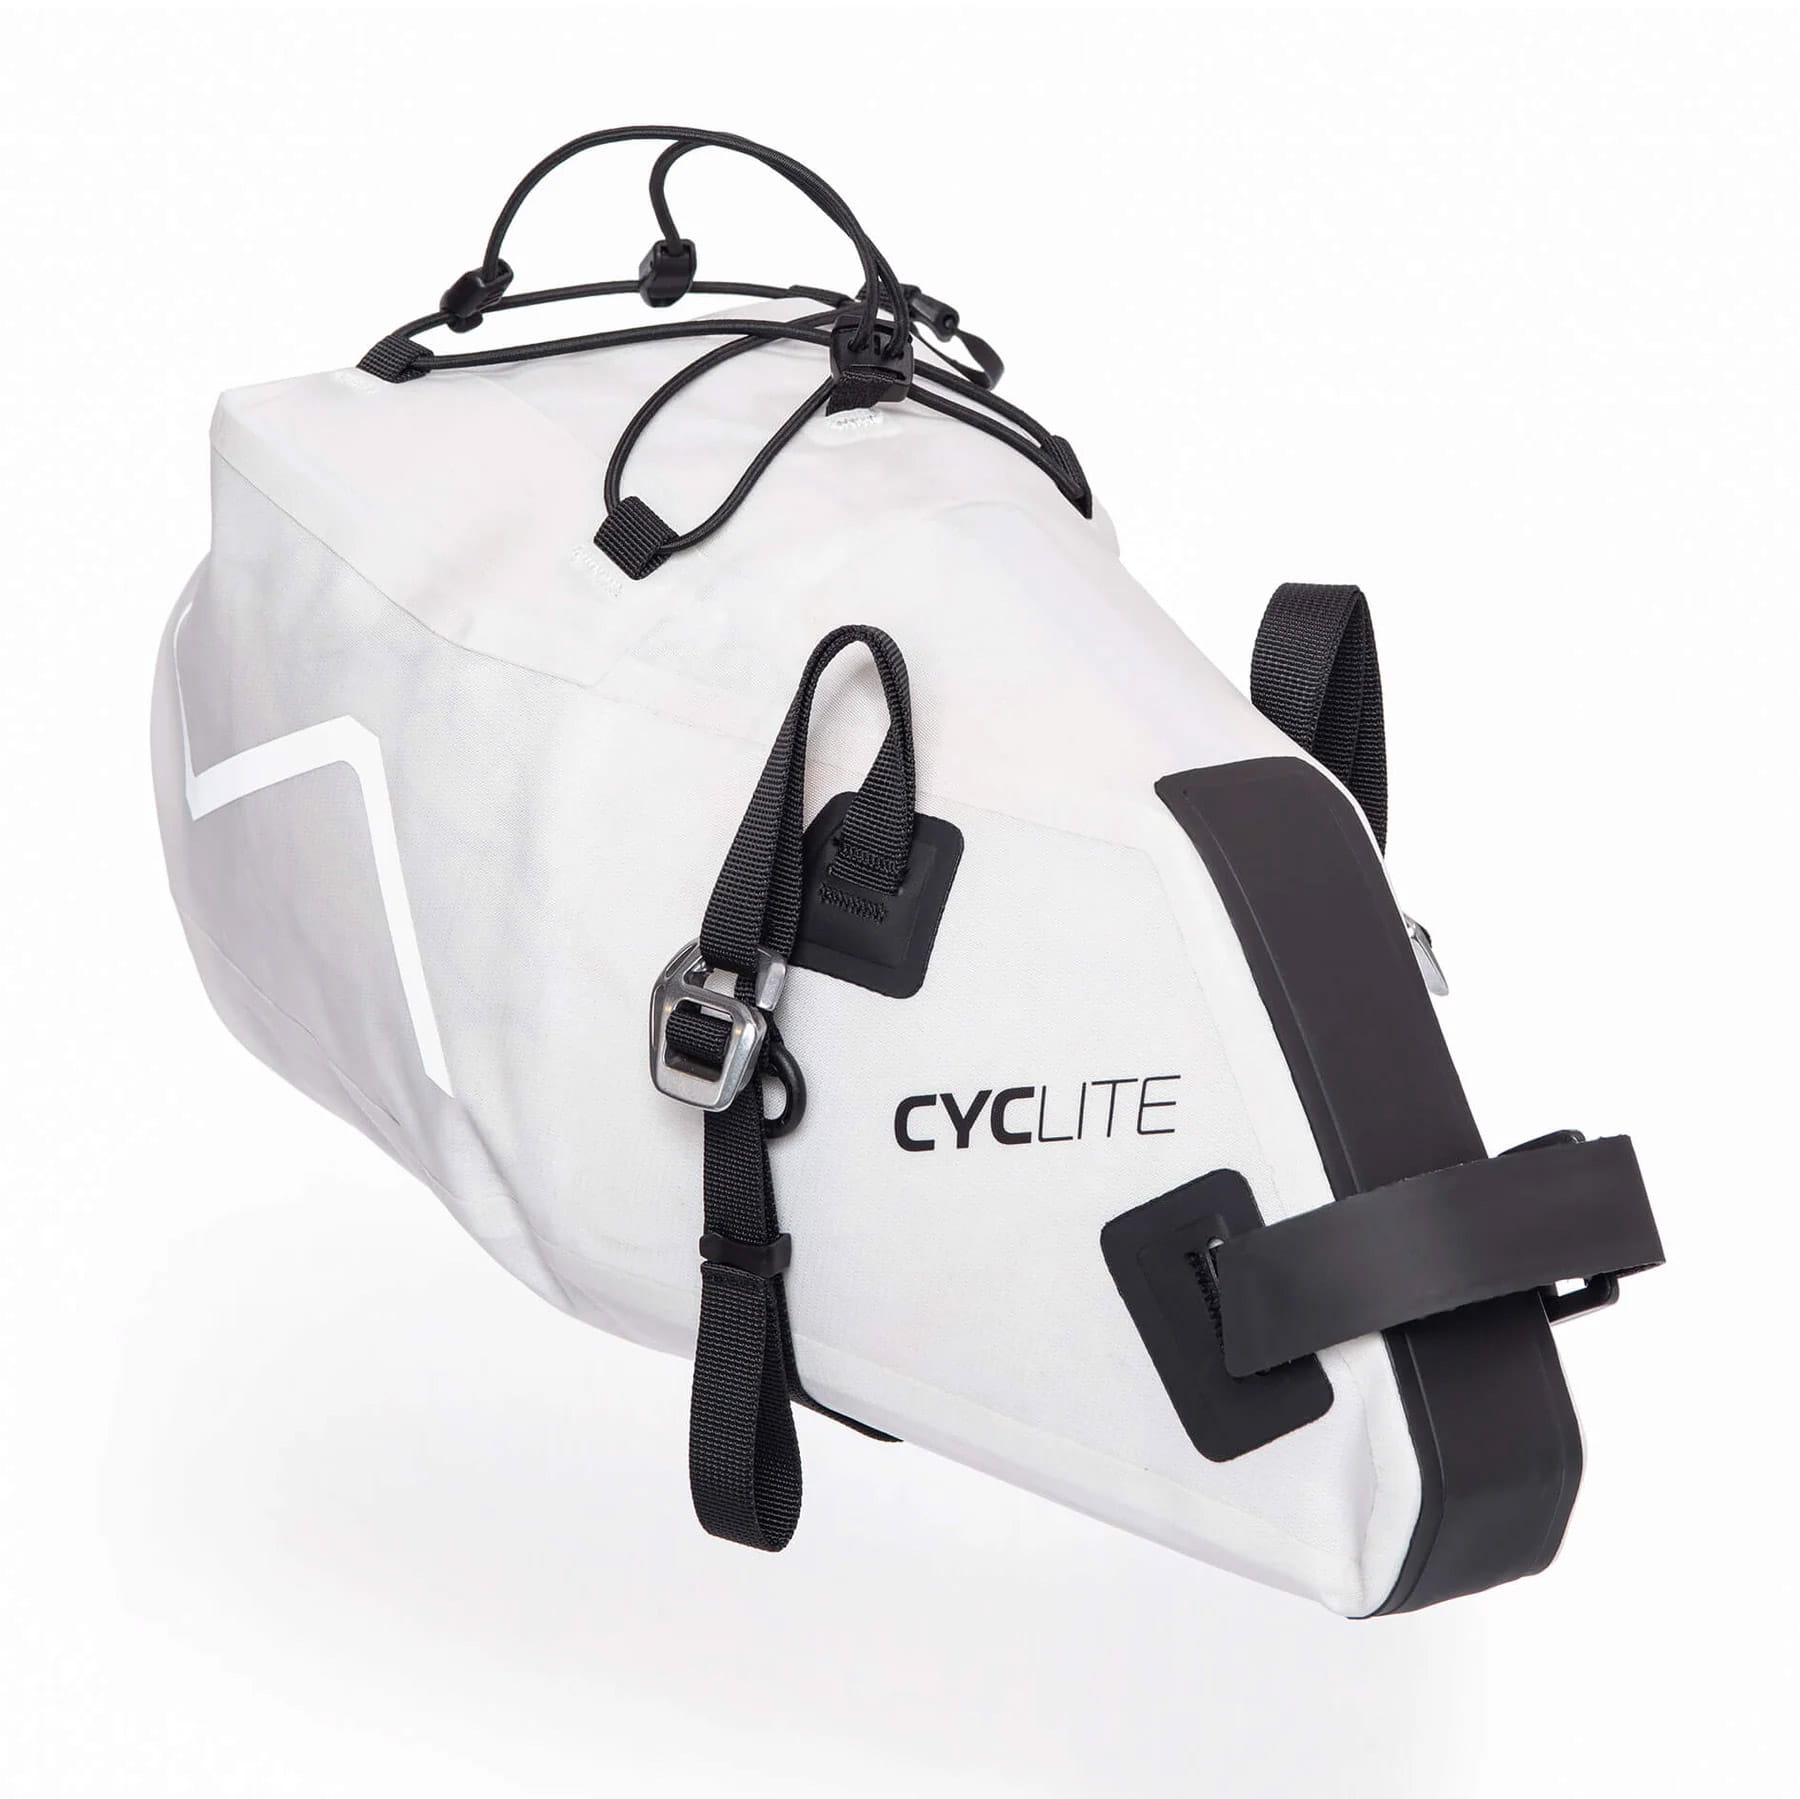 Cyclite Saddle Bag Small / 01 Satteltasche 8L